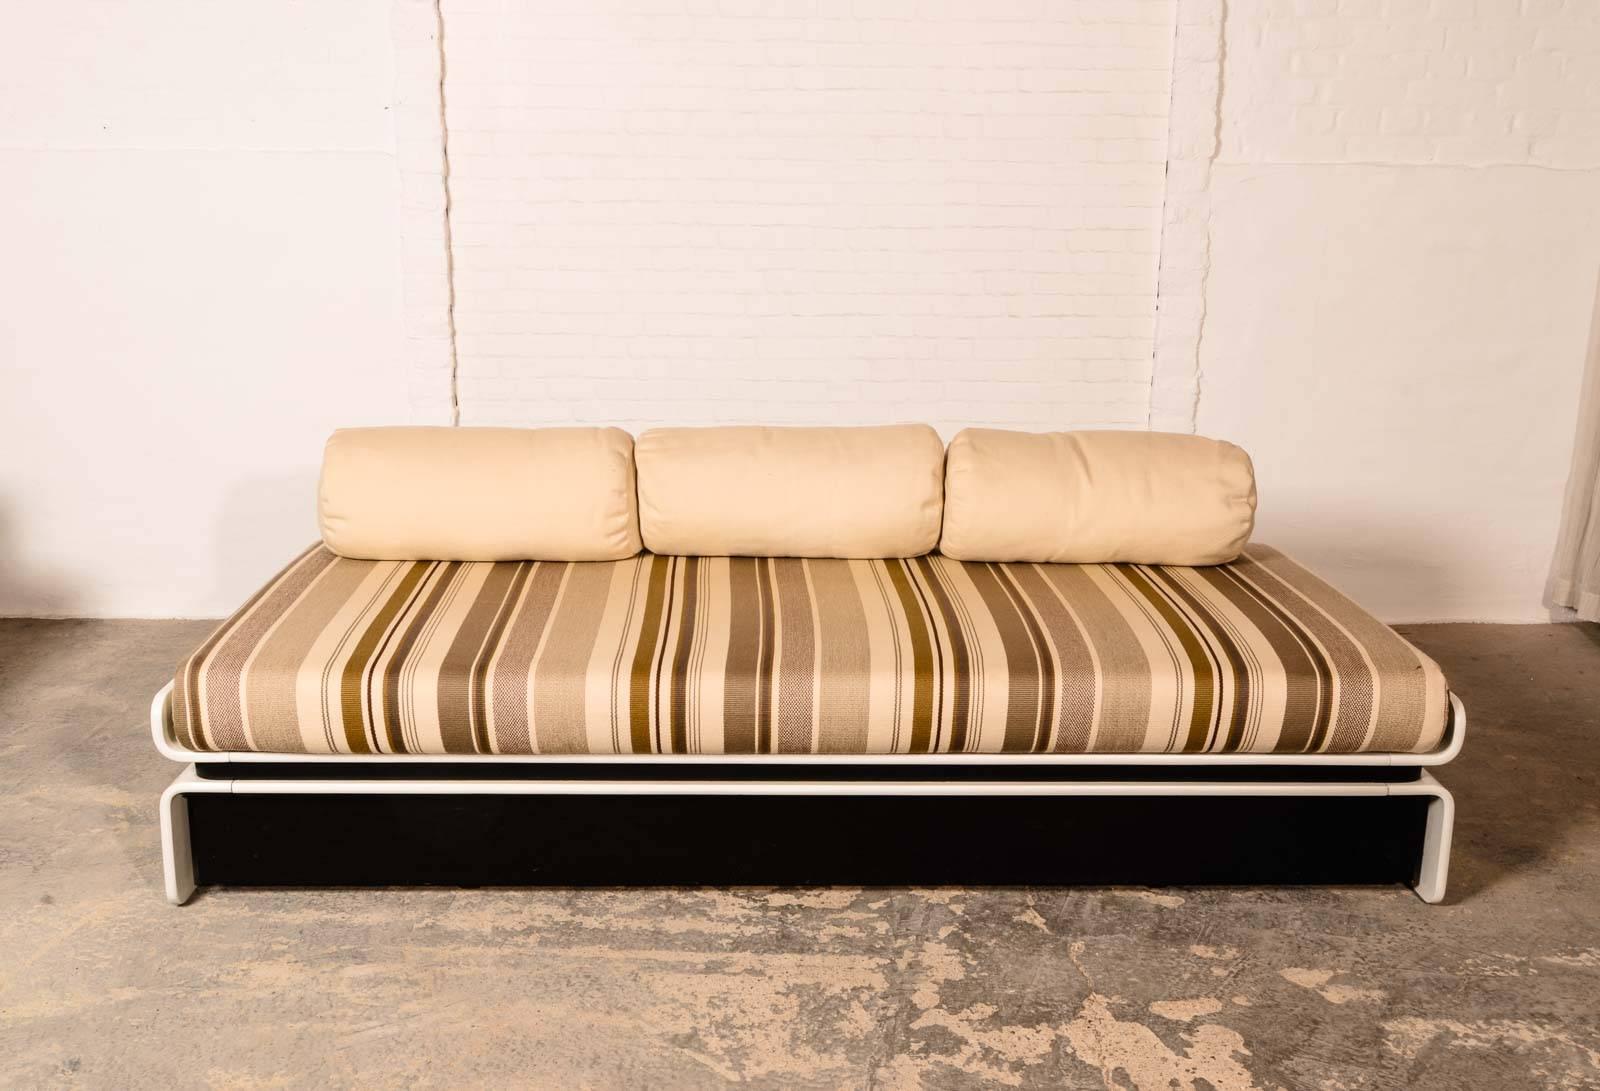 Mid-Century daybed with cushions designed by Luigi Colani for COR. This daybed is made of creamy colored lacquered wood and upholstered with a striped brown and olive green fabric. It contains also the original black covered mobile drawer. The